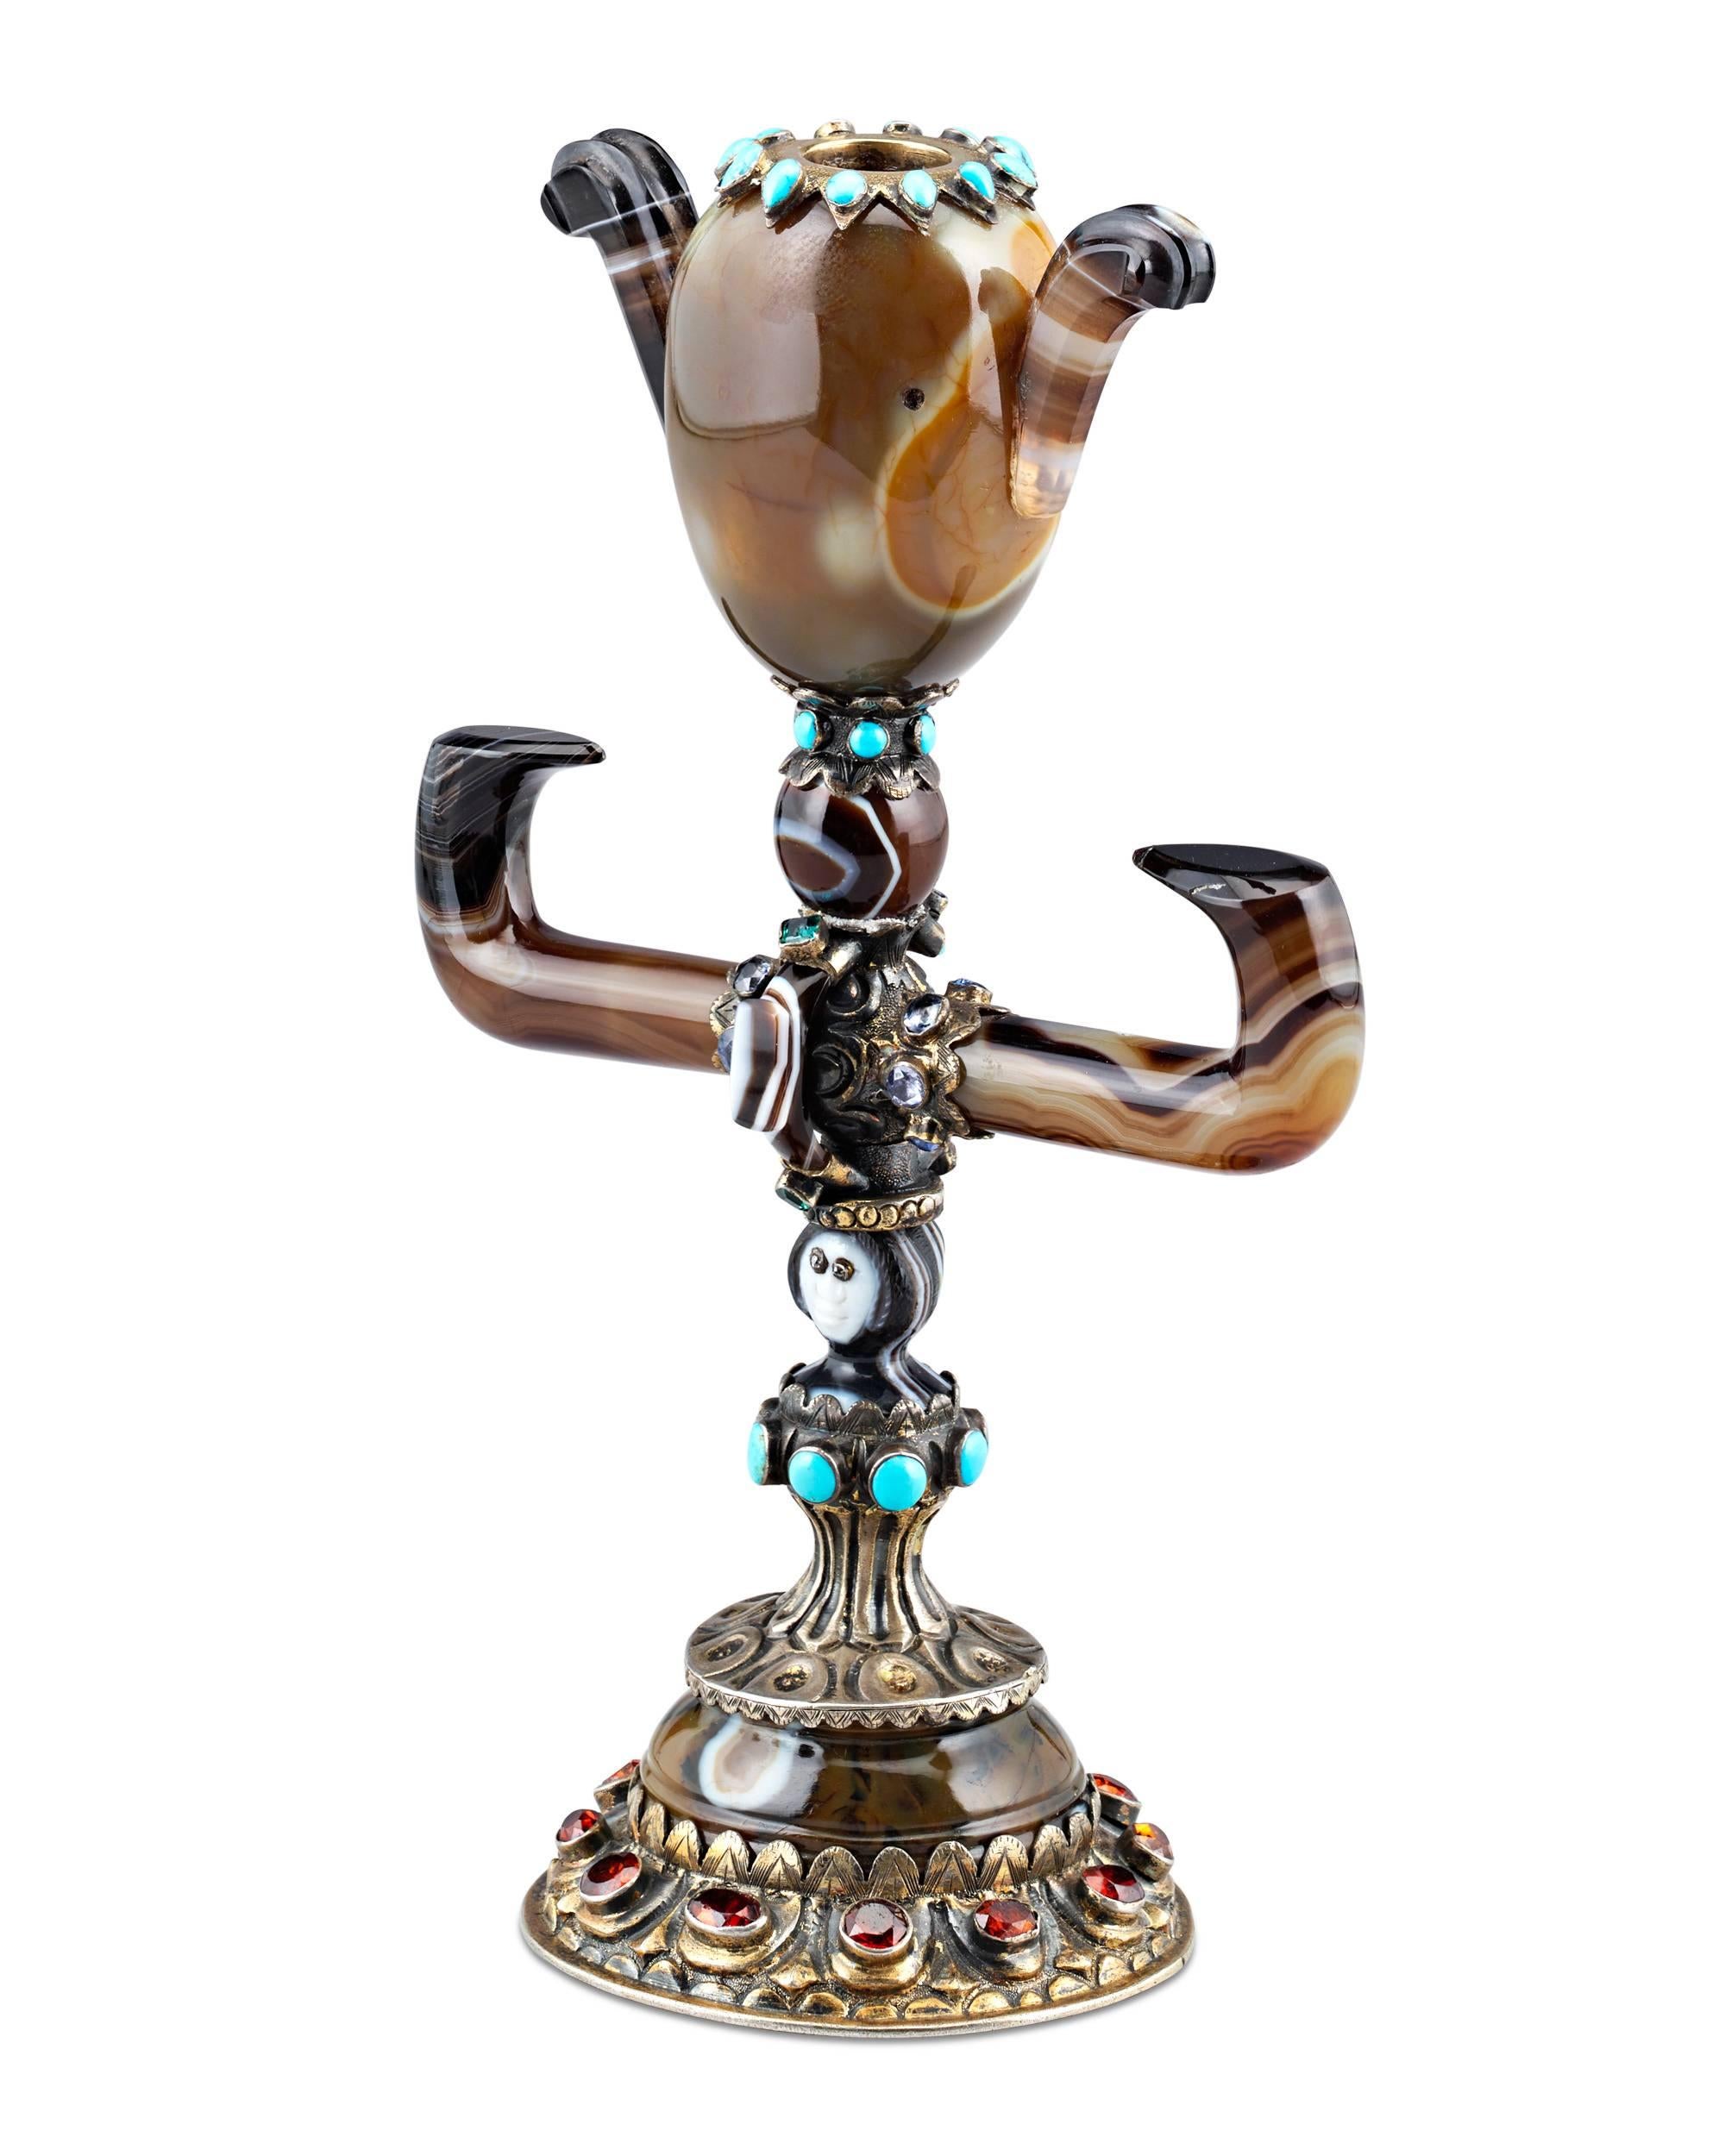 Masterfully handcrafted with clear influences of Chinese culture, this rare and unique agate and jeweled vase demonstrates Viennese command of the decorative arts.

Crafted of carved and polished agate in a wonderful display of artistry, this